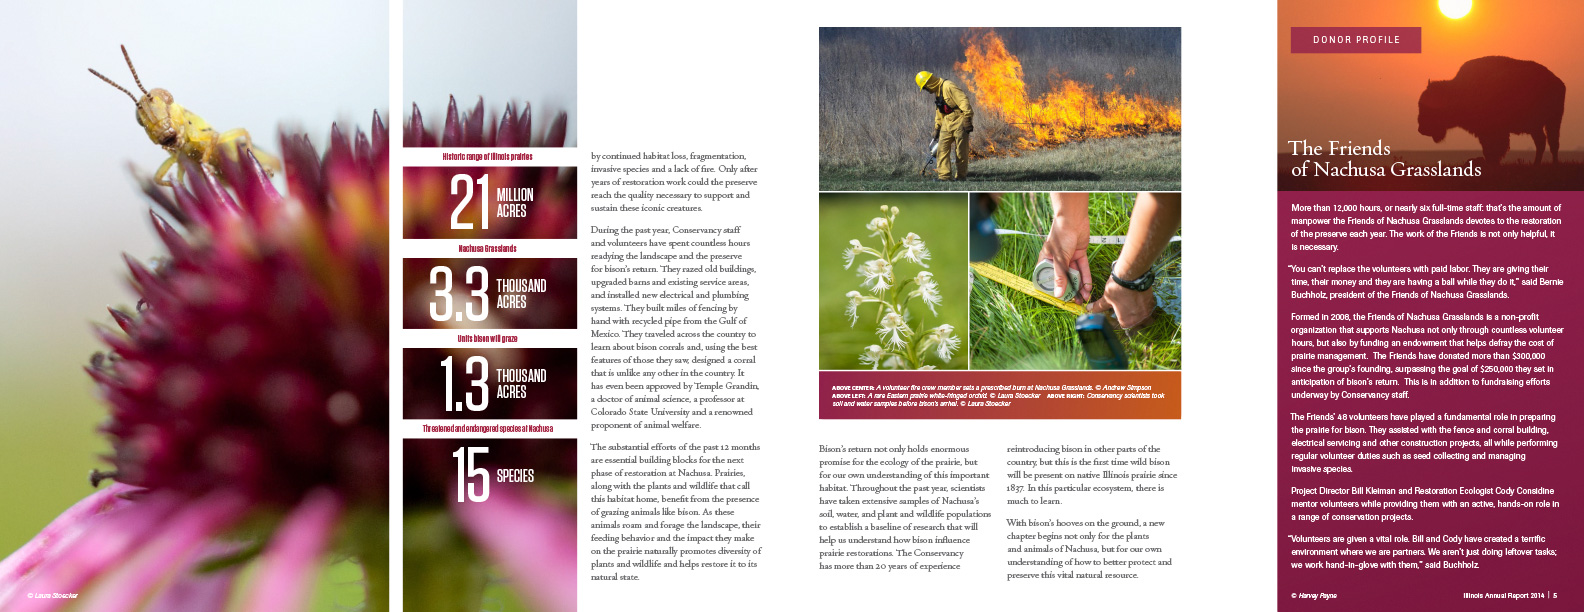 Fourth spread from the 2015 annual report